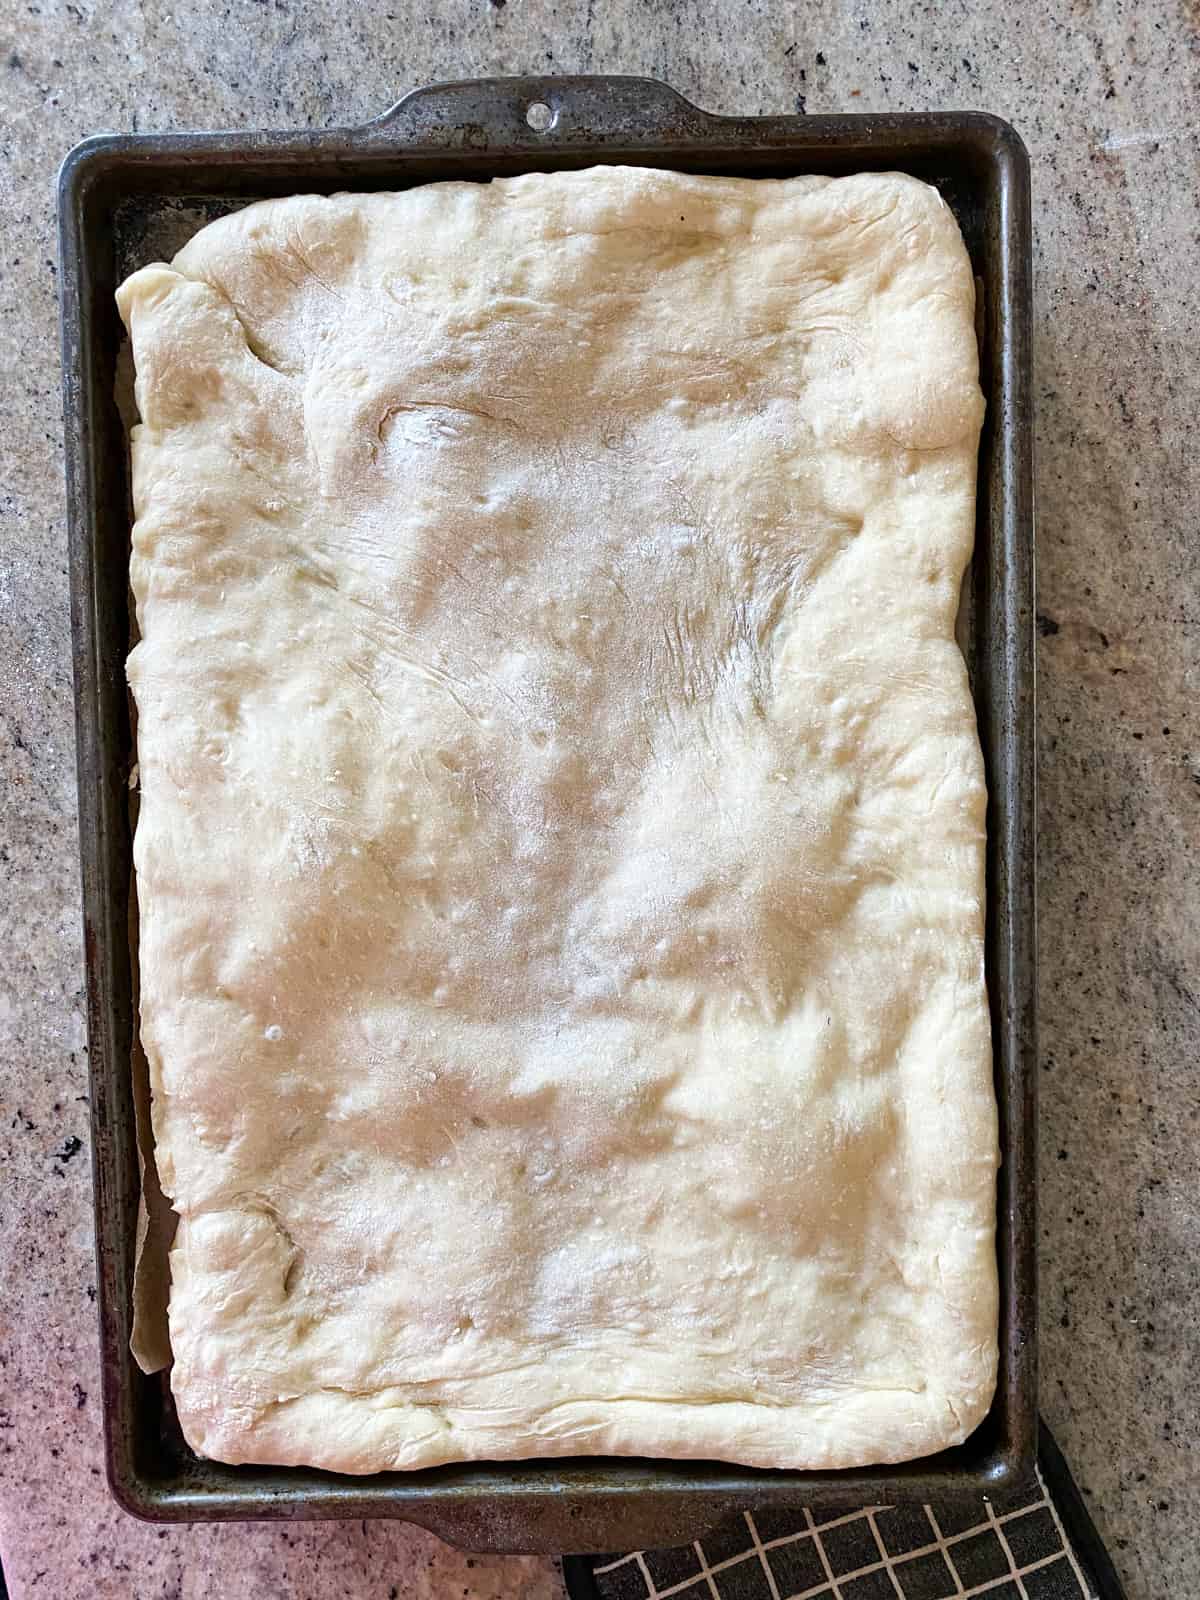 Top down shot of parbaked pizza crust on a sheet pan.